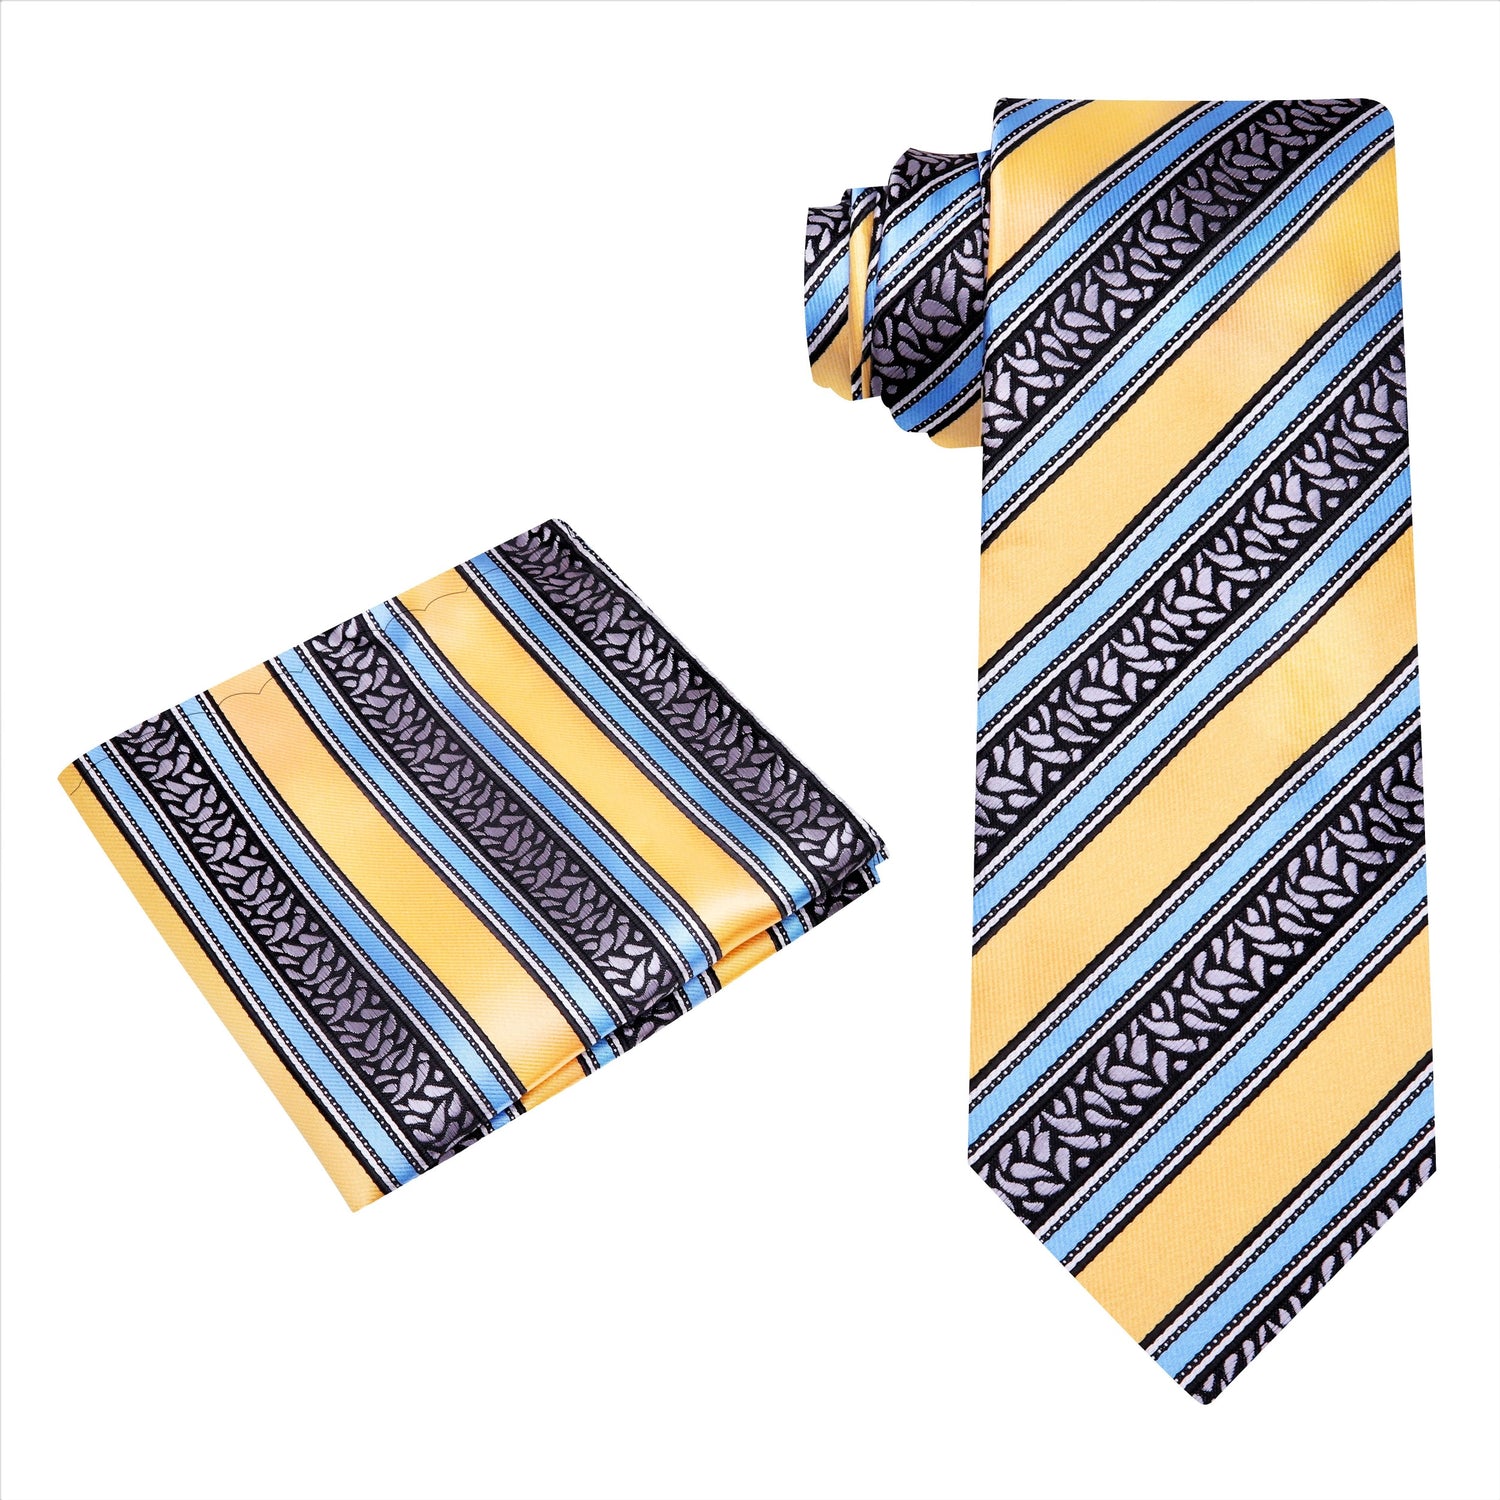 Alt View: Yellow, Grey and Light Blue Stripe Tie and pocket Square